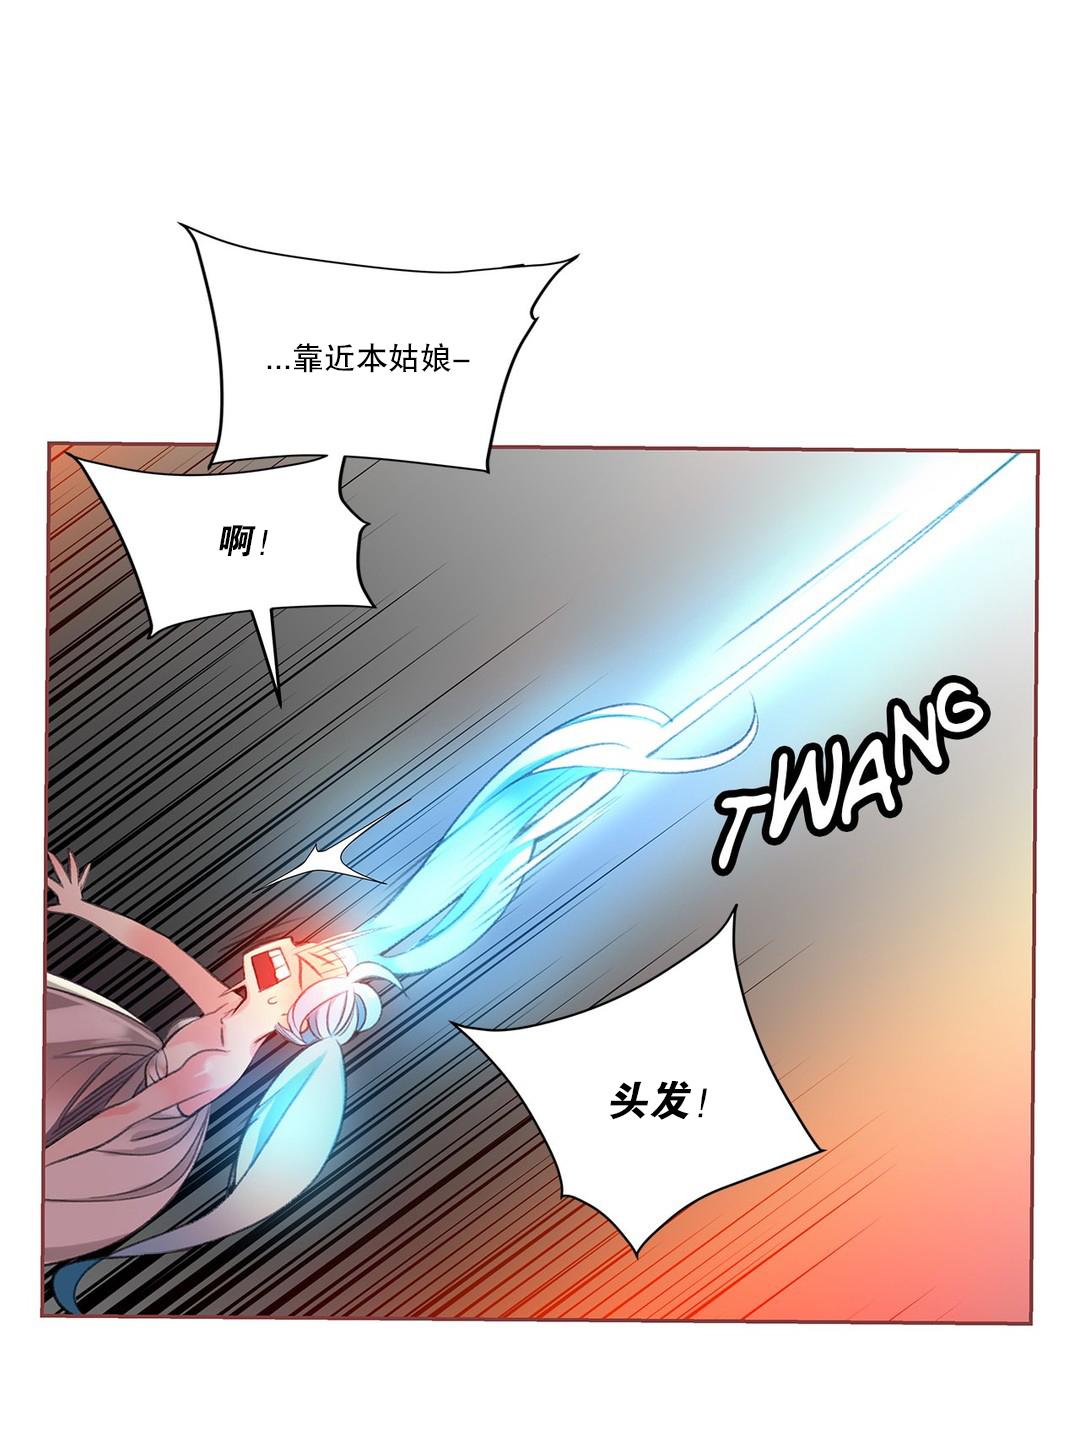 Webcam [Juder] Lilith`s Cord (第二季) Ch.61-64 [Chinese] [aaatwist个人汉化] [Ongoing] - Original Model - Page 10